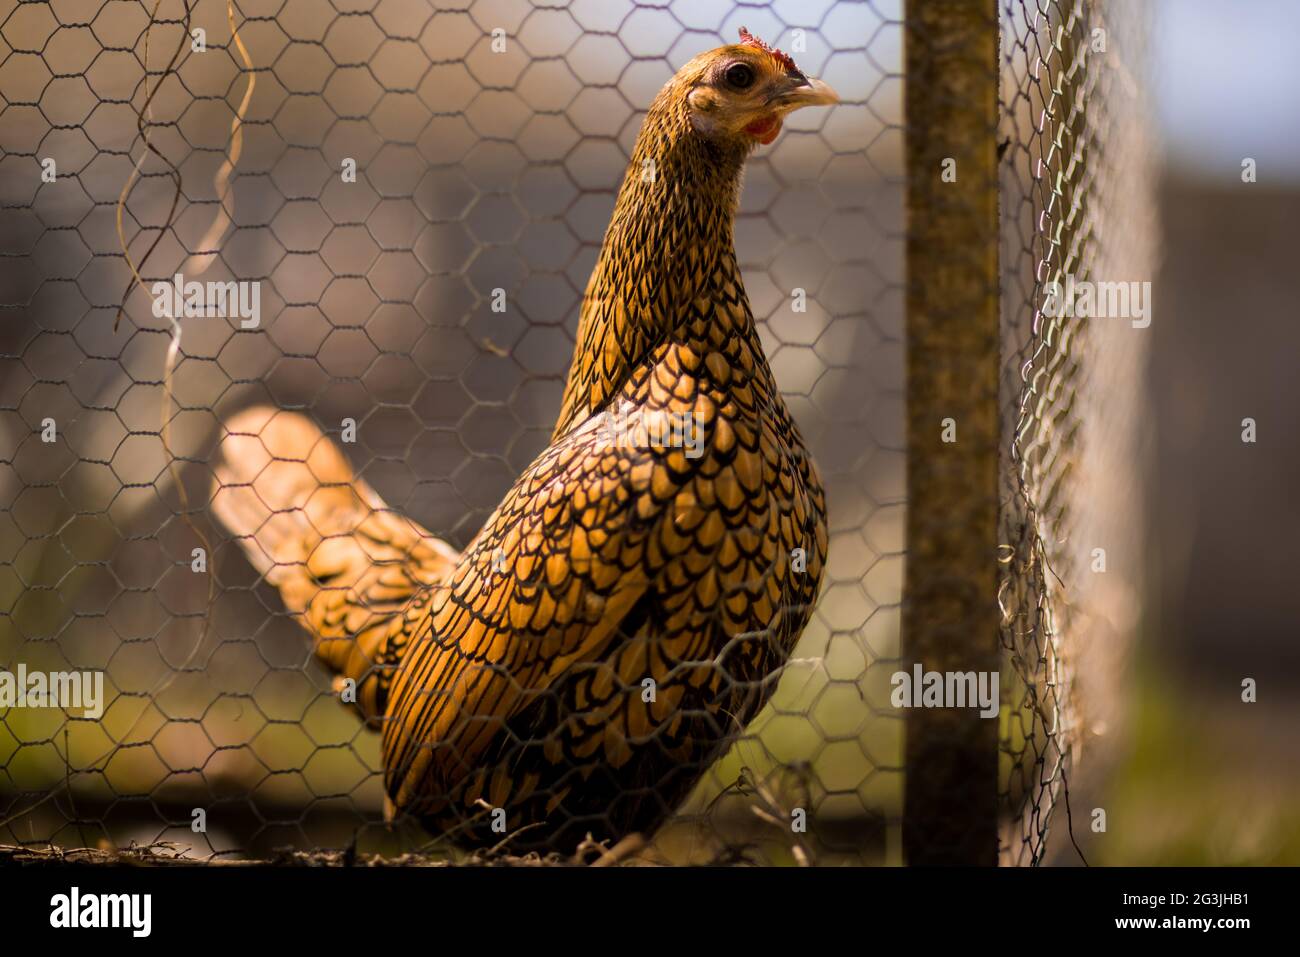 Free Range Chickens - Ginger the chicken spends her time basking in the sun and roaming around the garden to her heart's content! Stock Photo